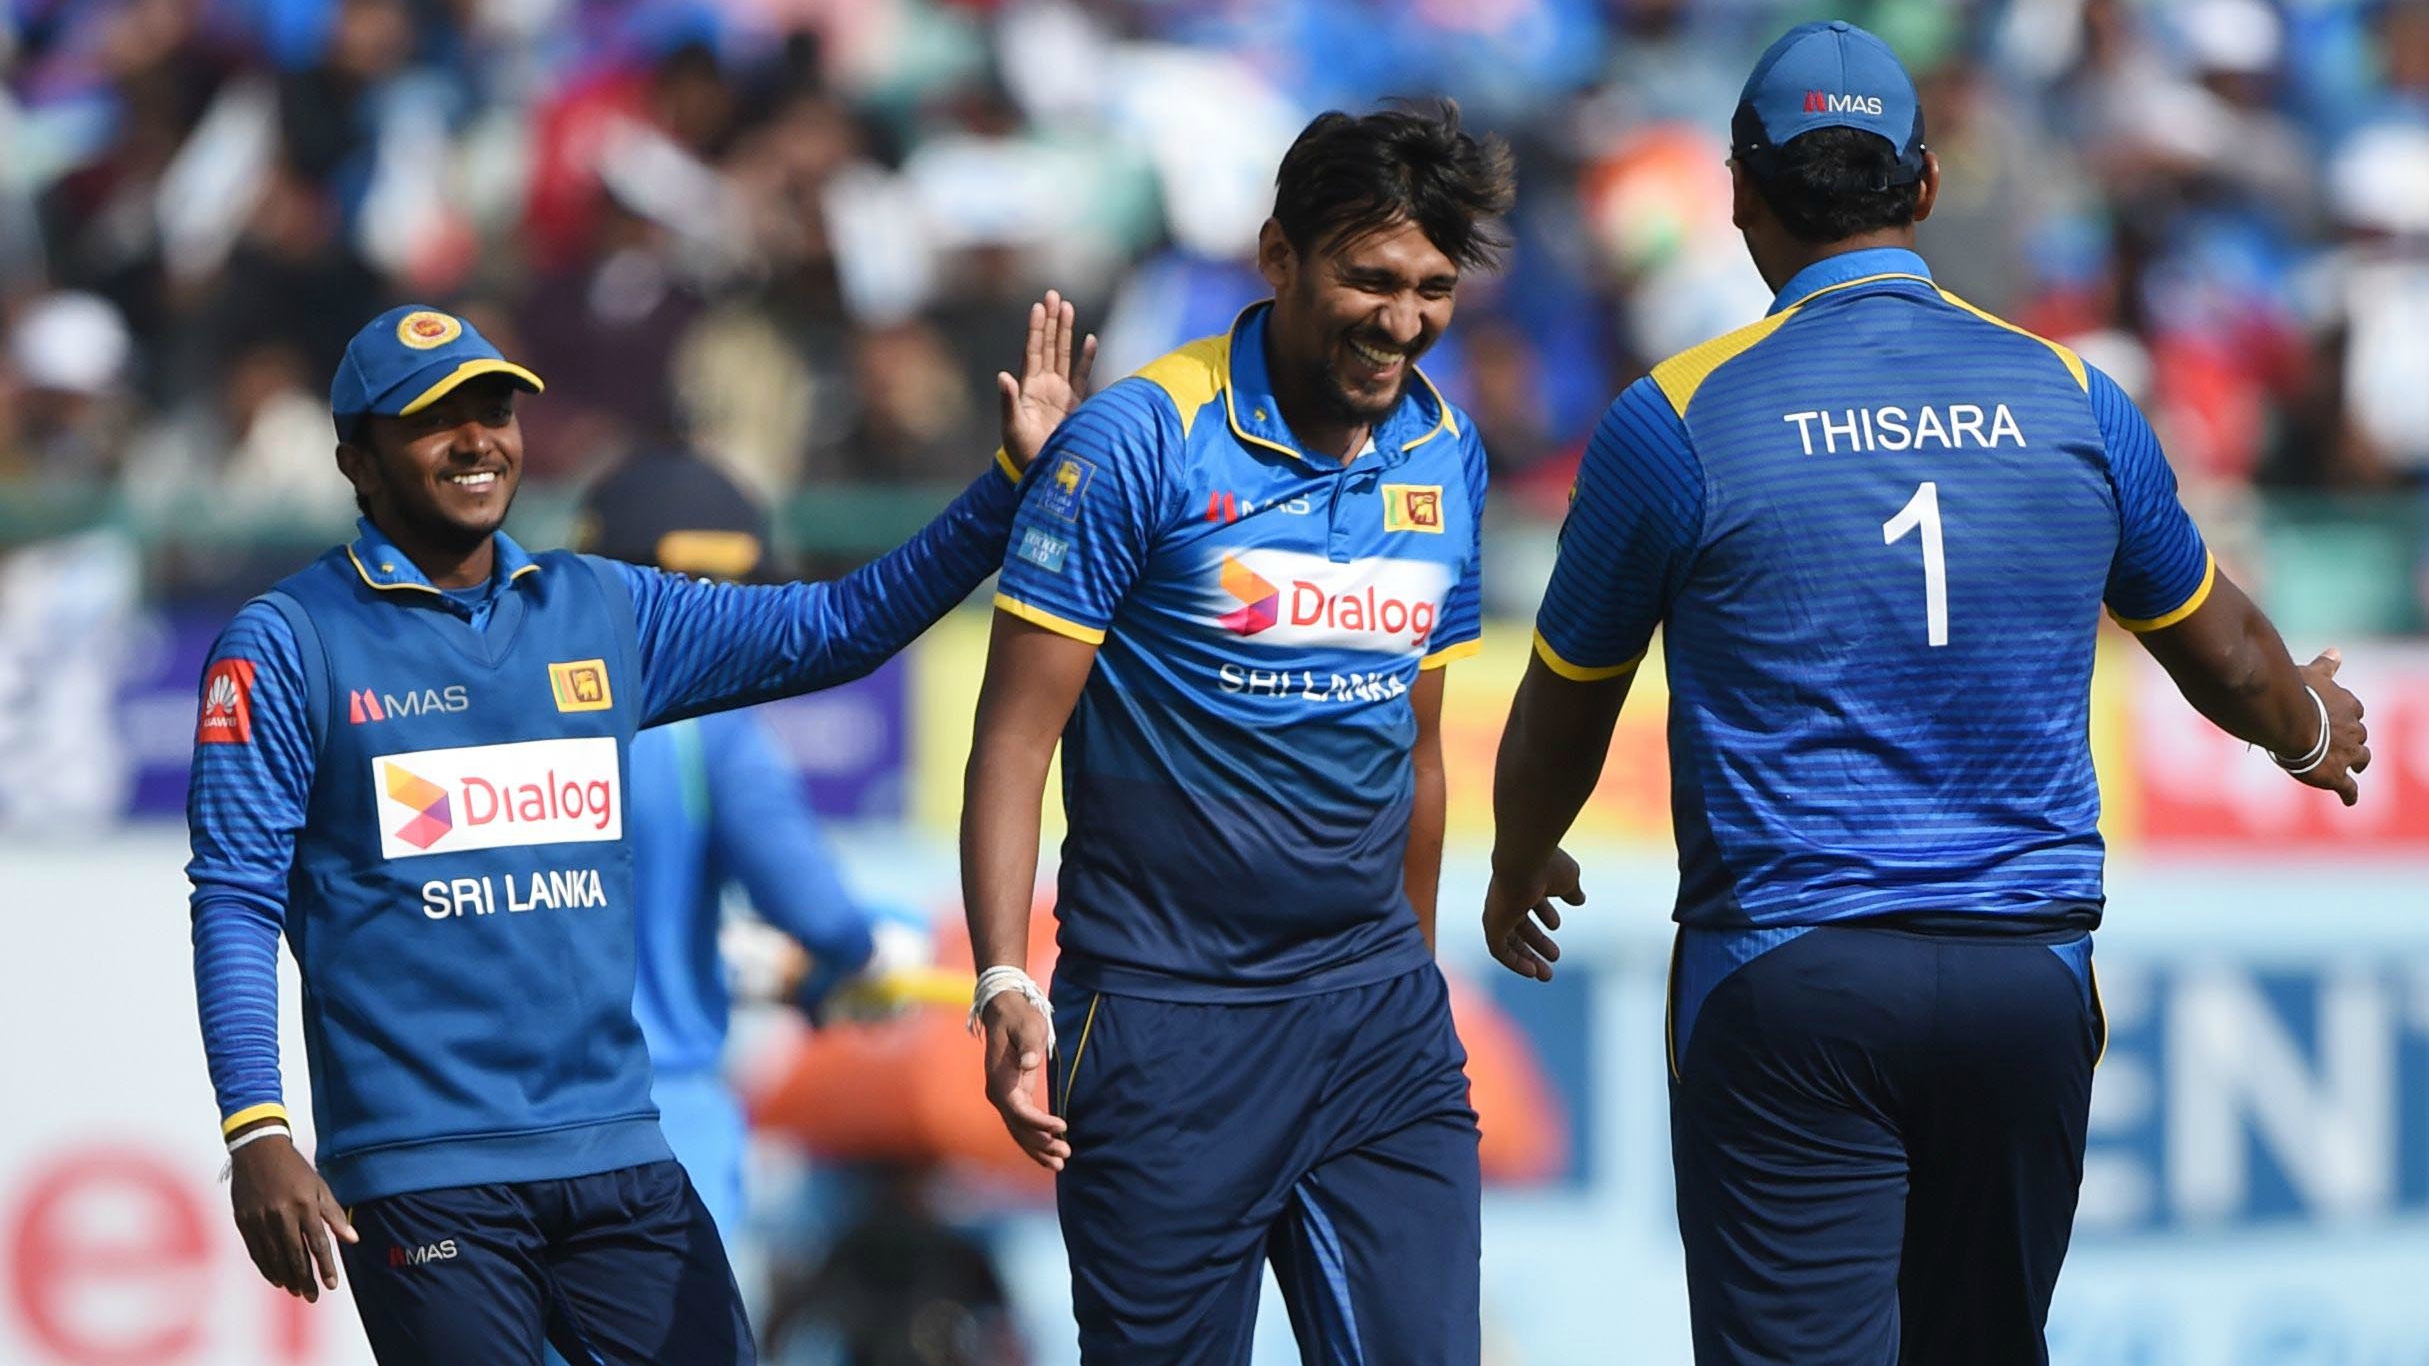 2nd ODI, Preview: Can Thisara Perera & Co inflict rare series defeat on mighty hosts?